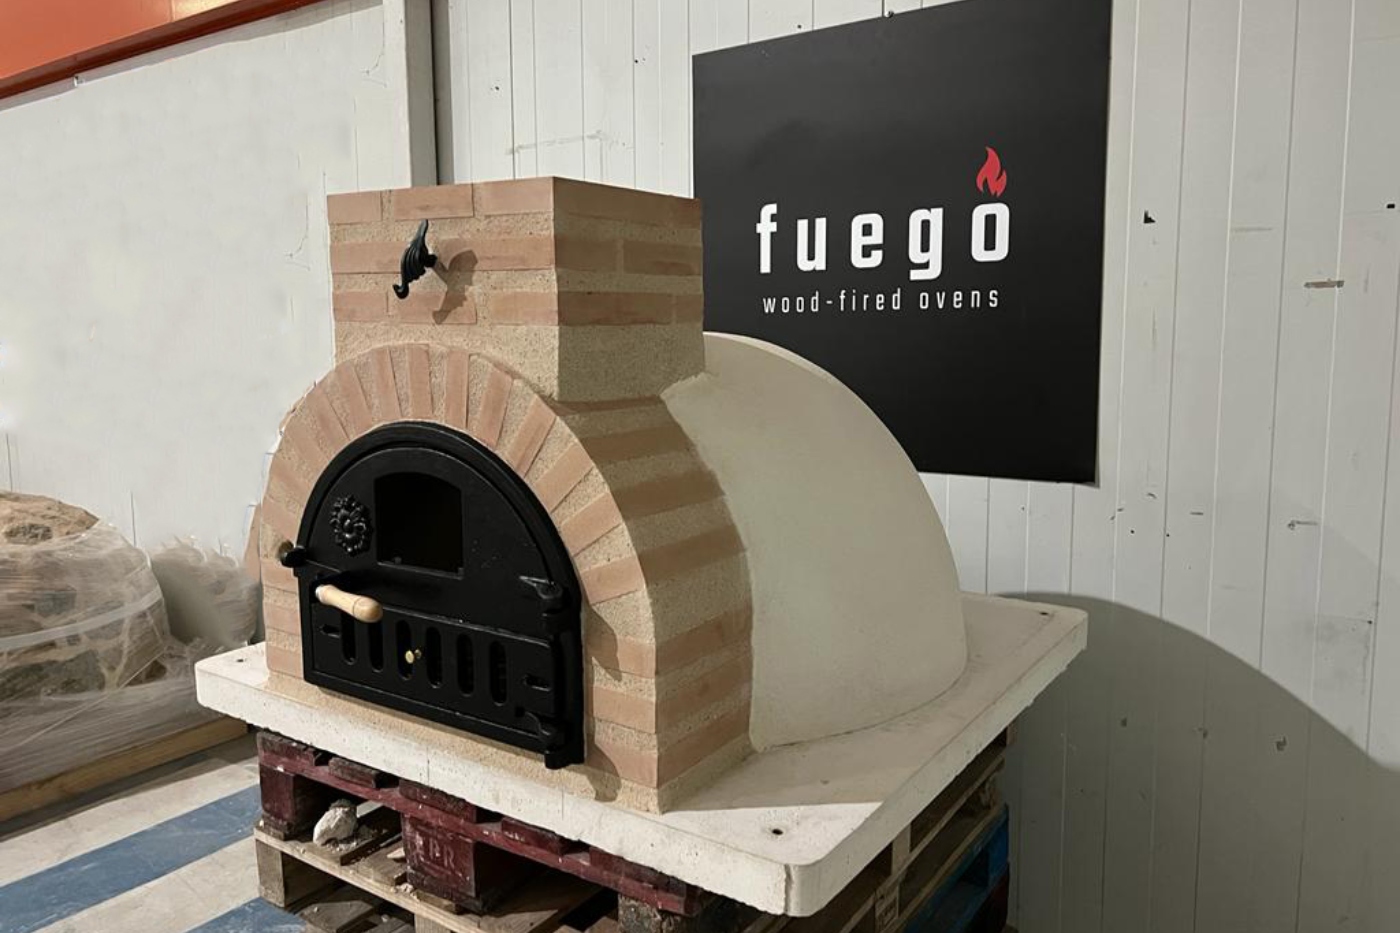 How to insulate a wood-fired pizza oven